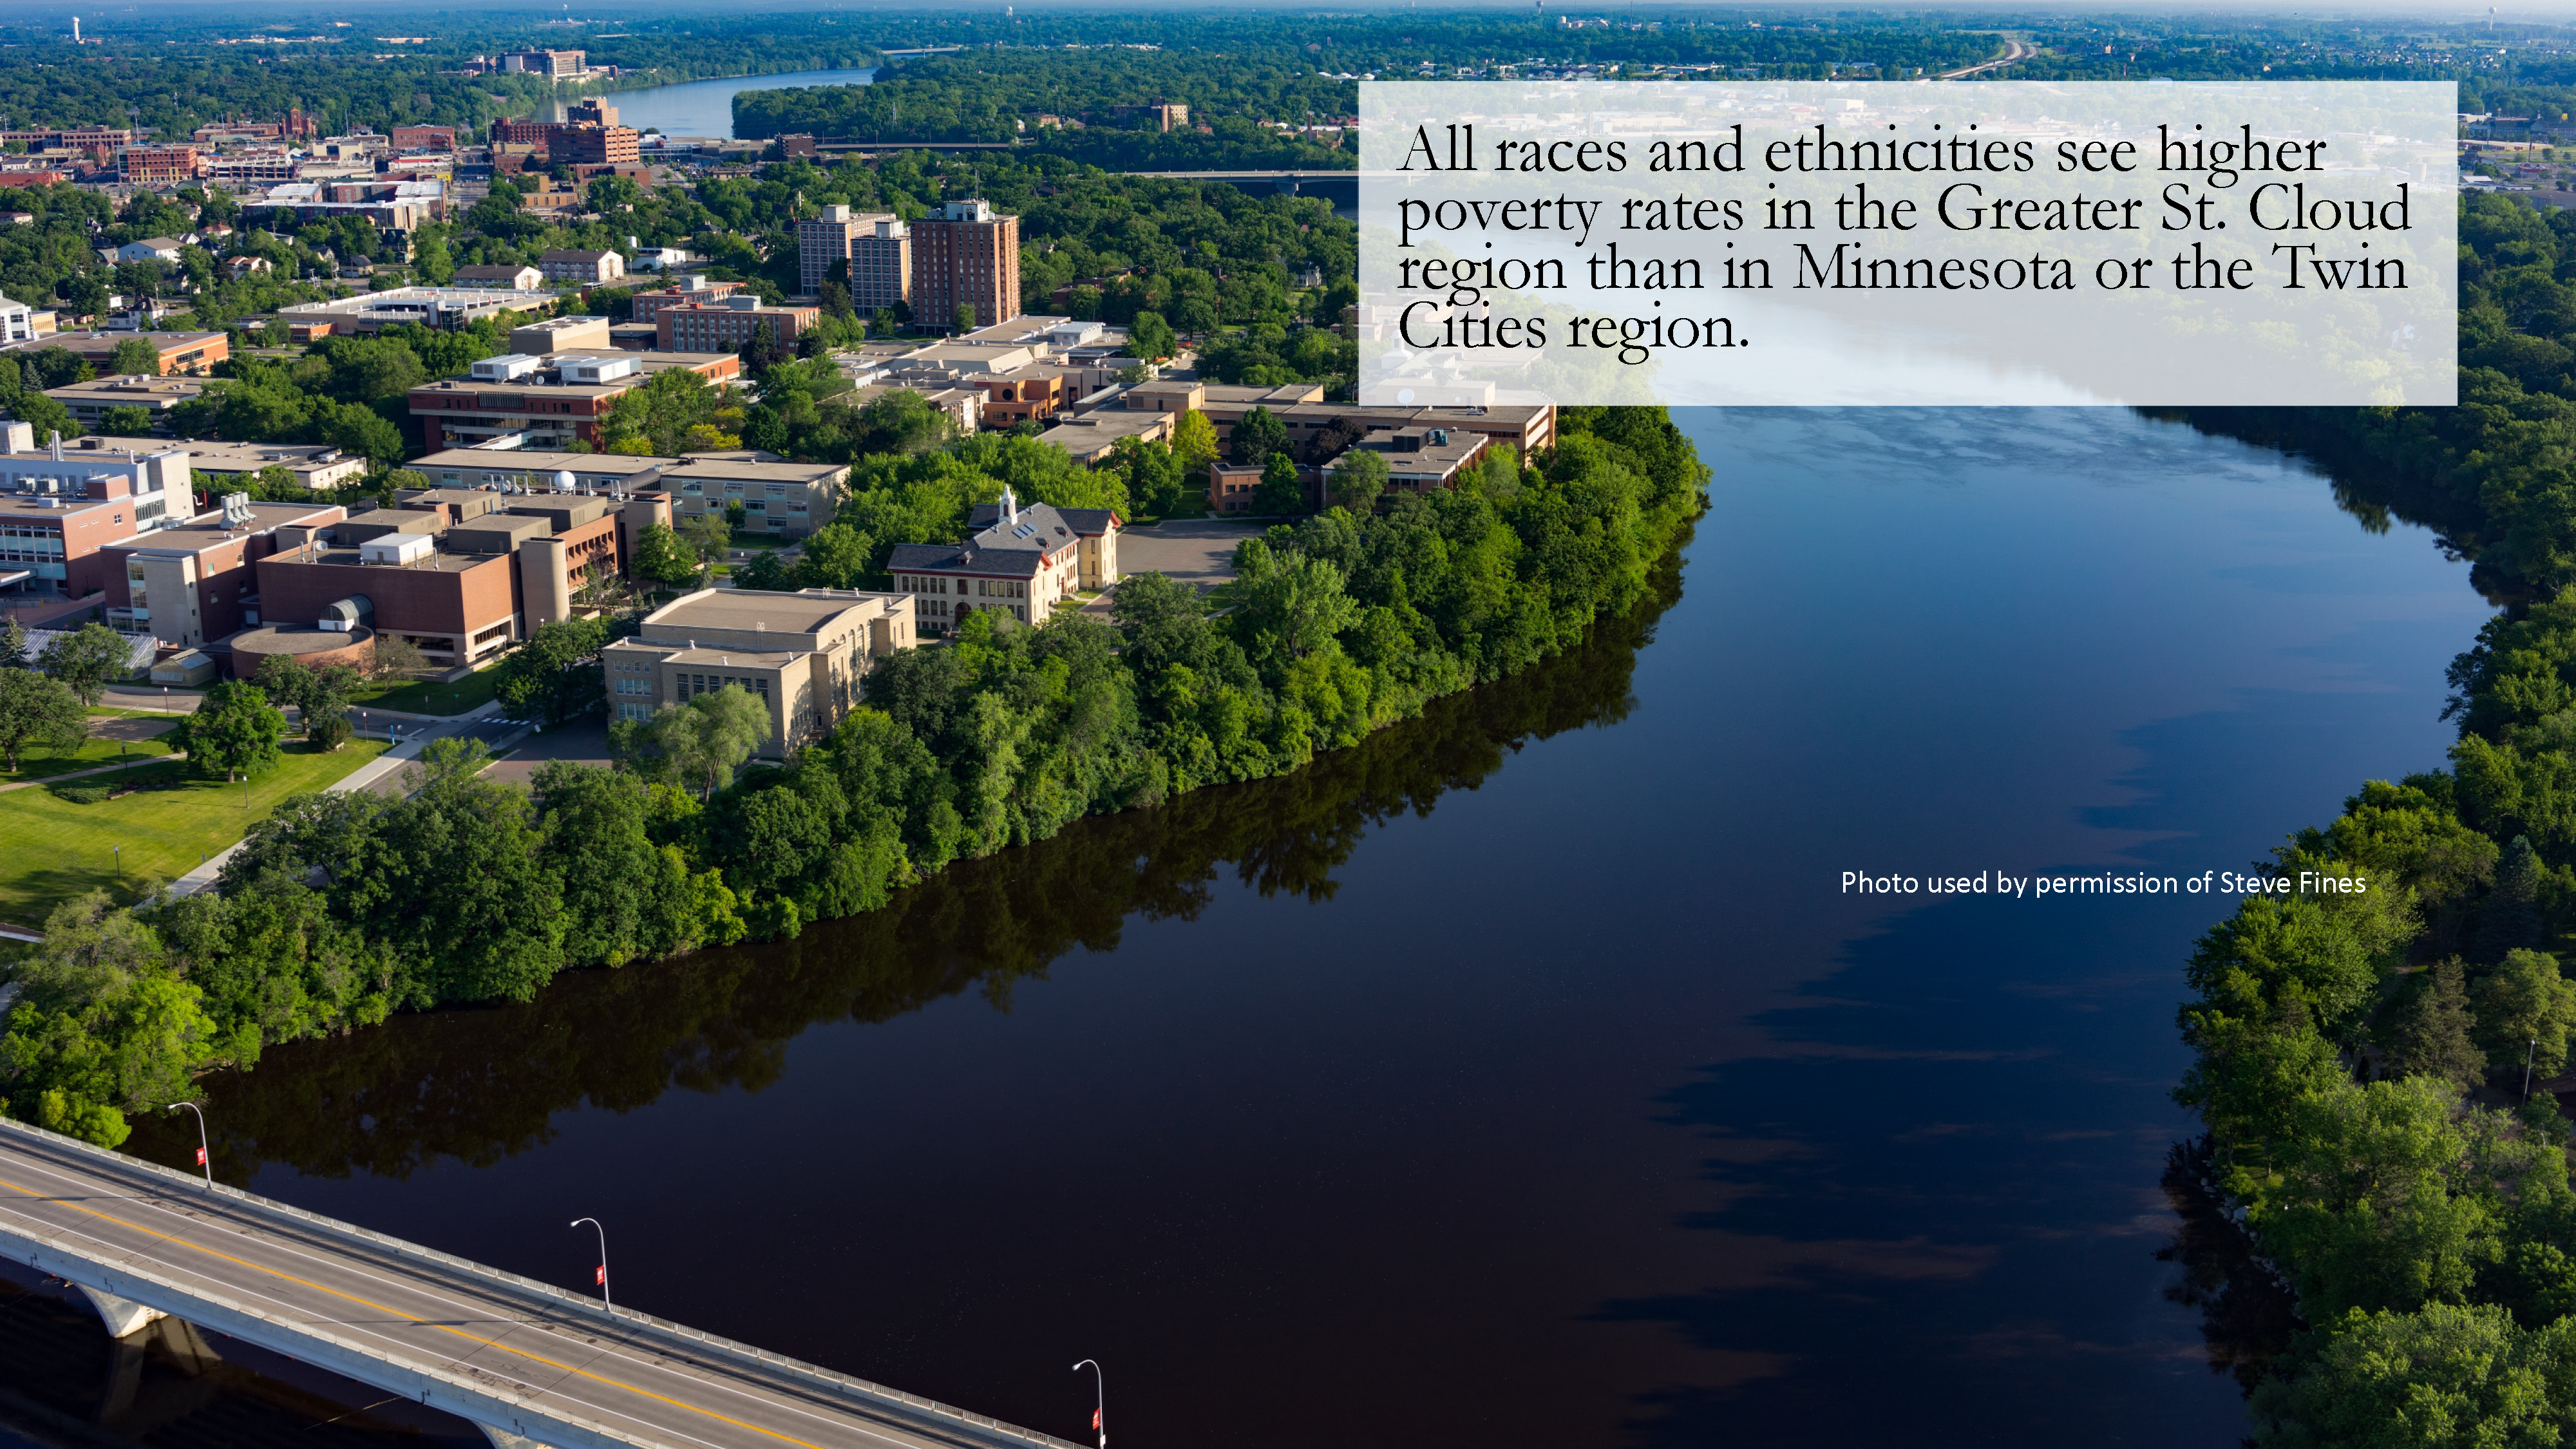 A picture of St. Cloud, MN featuring a quote from the Social Equity Dashboard: All races and ethnicities see higher poverty rates in the Greater St. Cloud region than in Minnesota or the Twin Cities region.